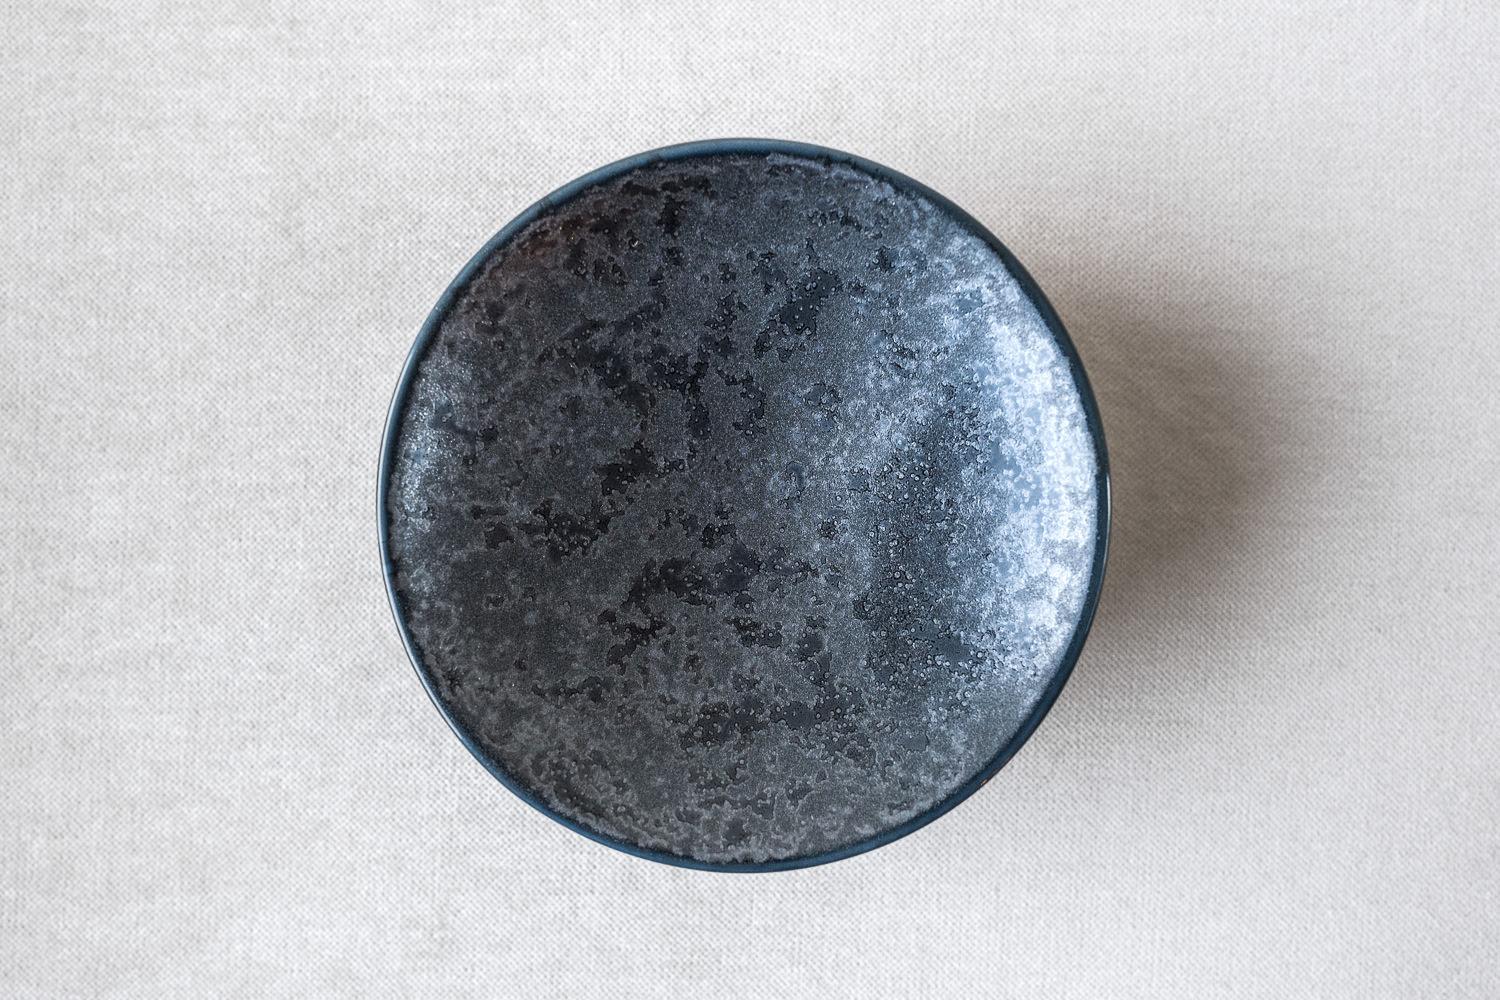 French Set of 2 x Ovum, Nº8 / Graphite Grey / Side Dish, Handmade Porcelain Tableware For Sale